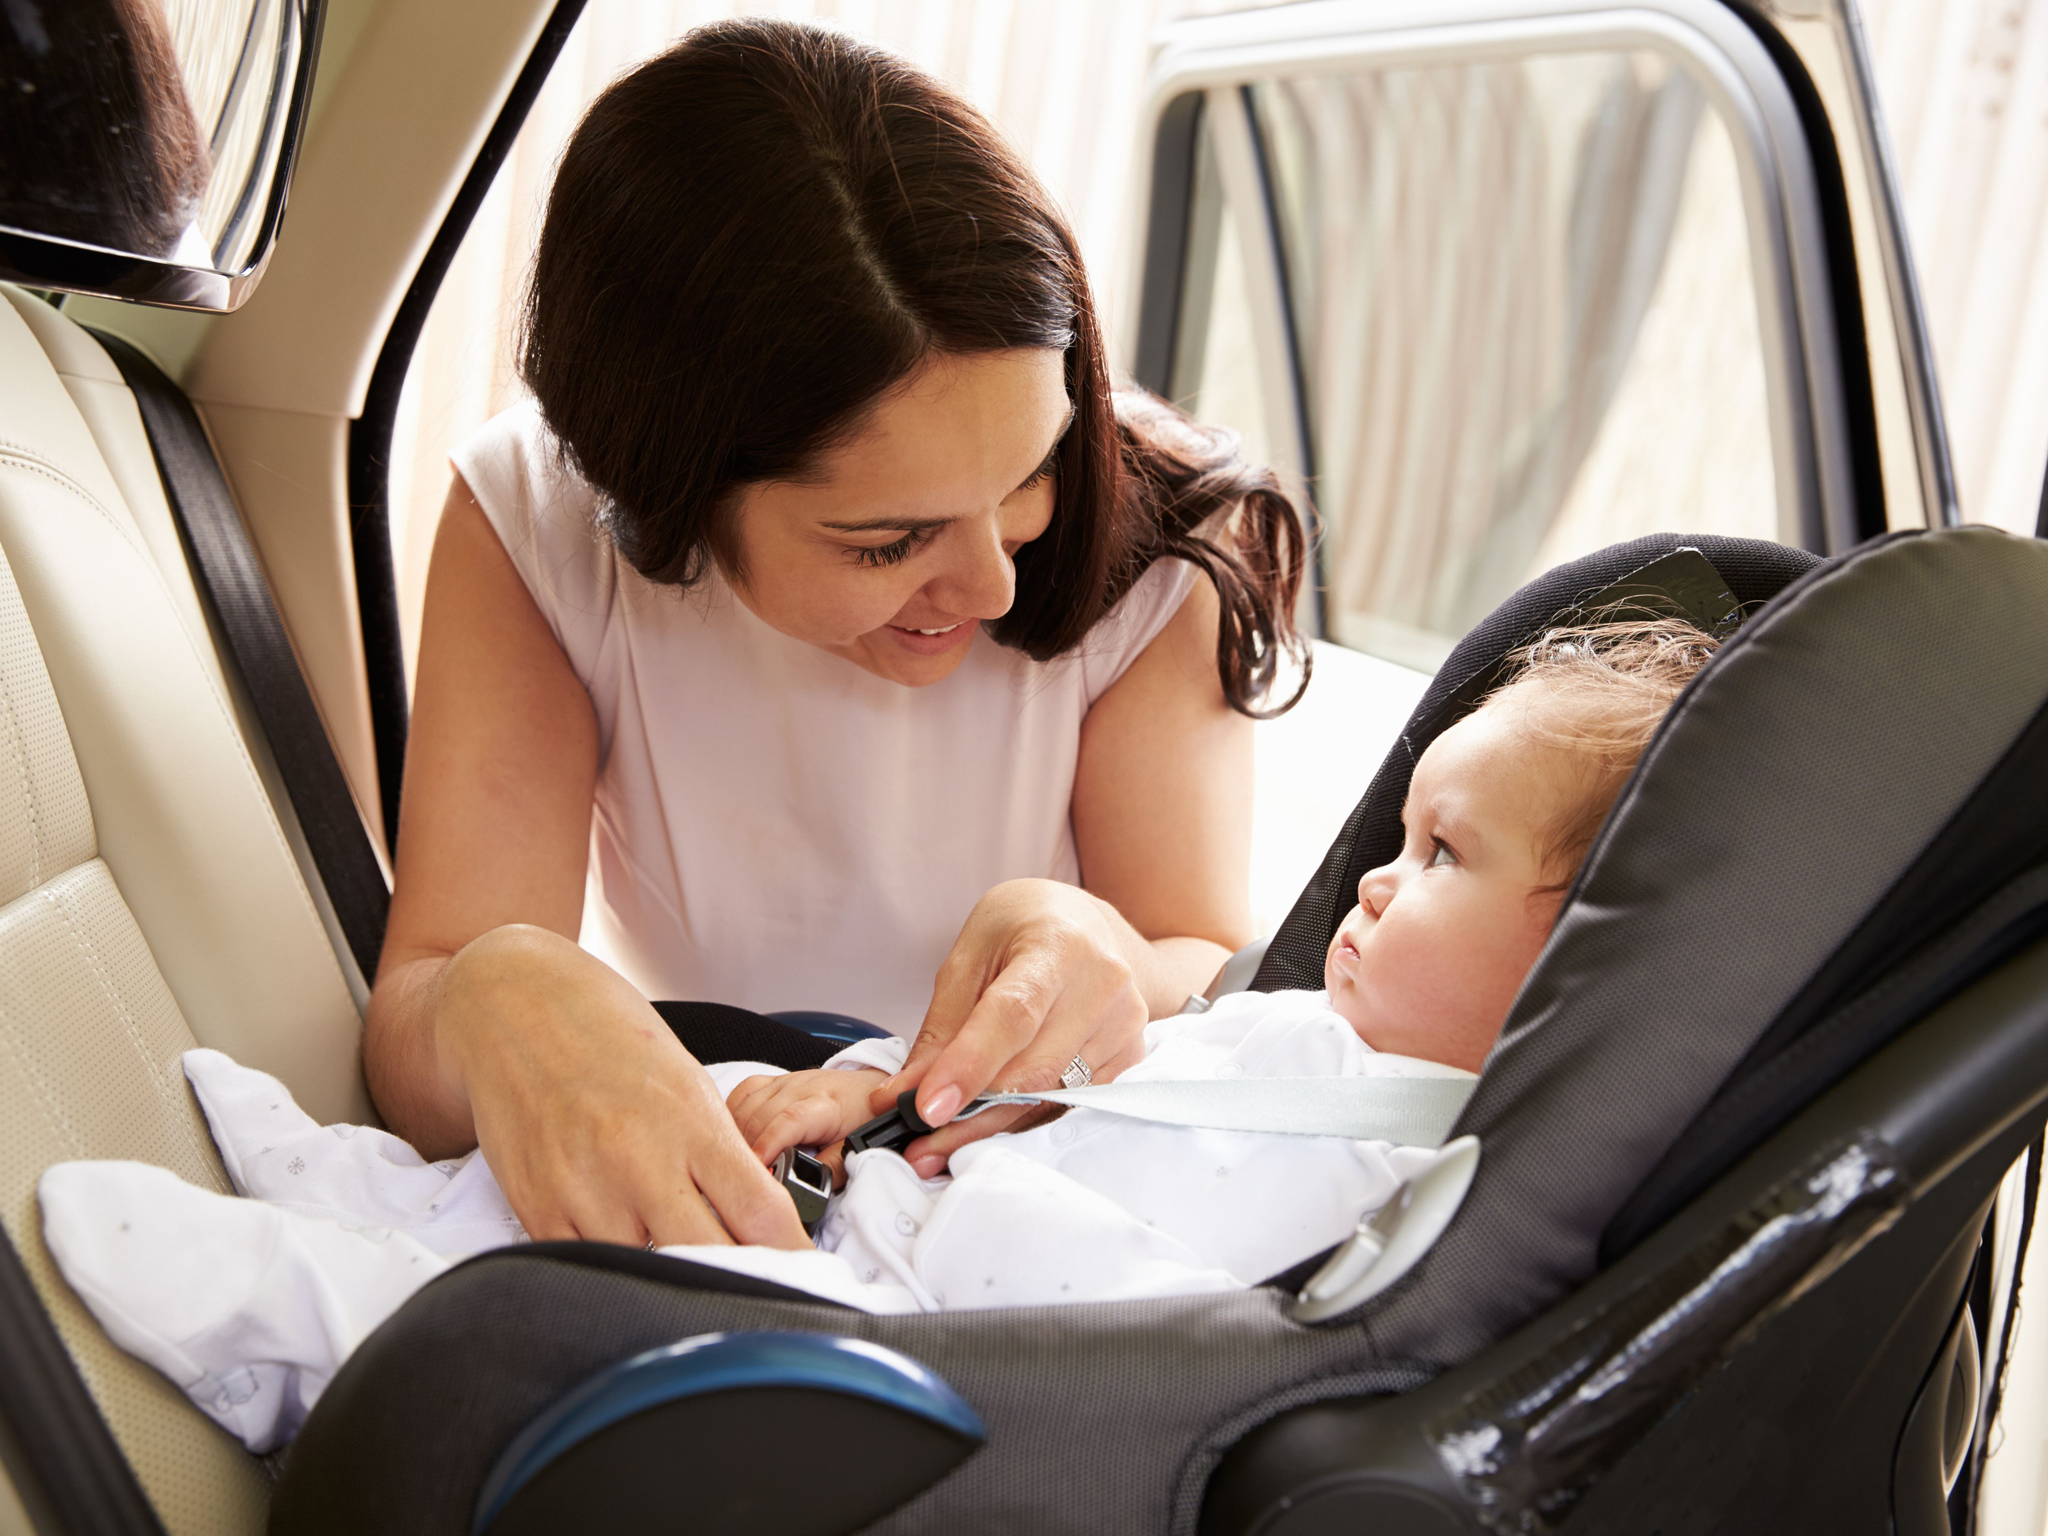 Babies must be in rear-facing car seats until they are 15 months old